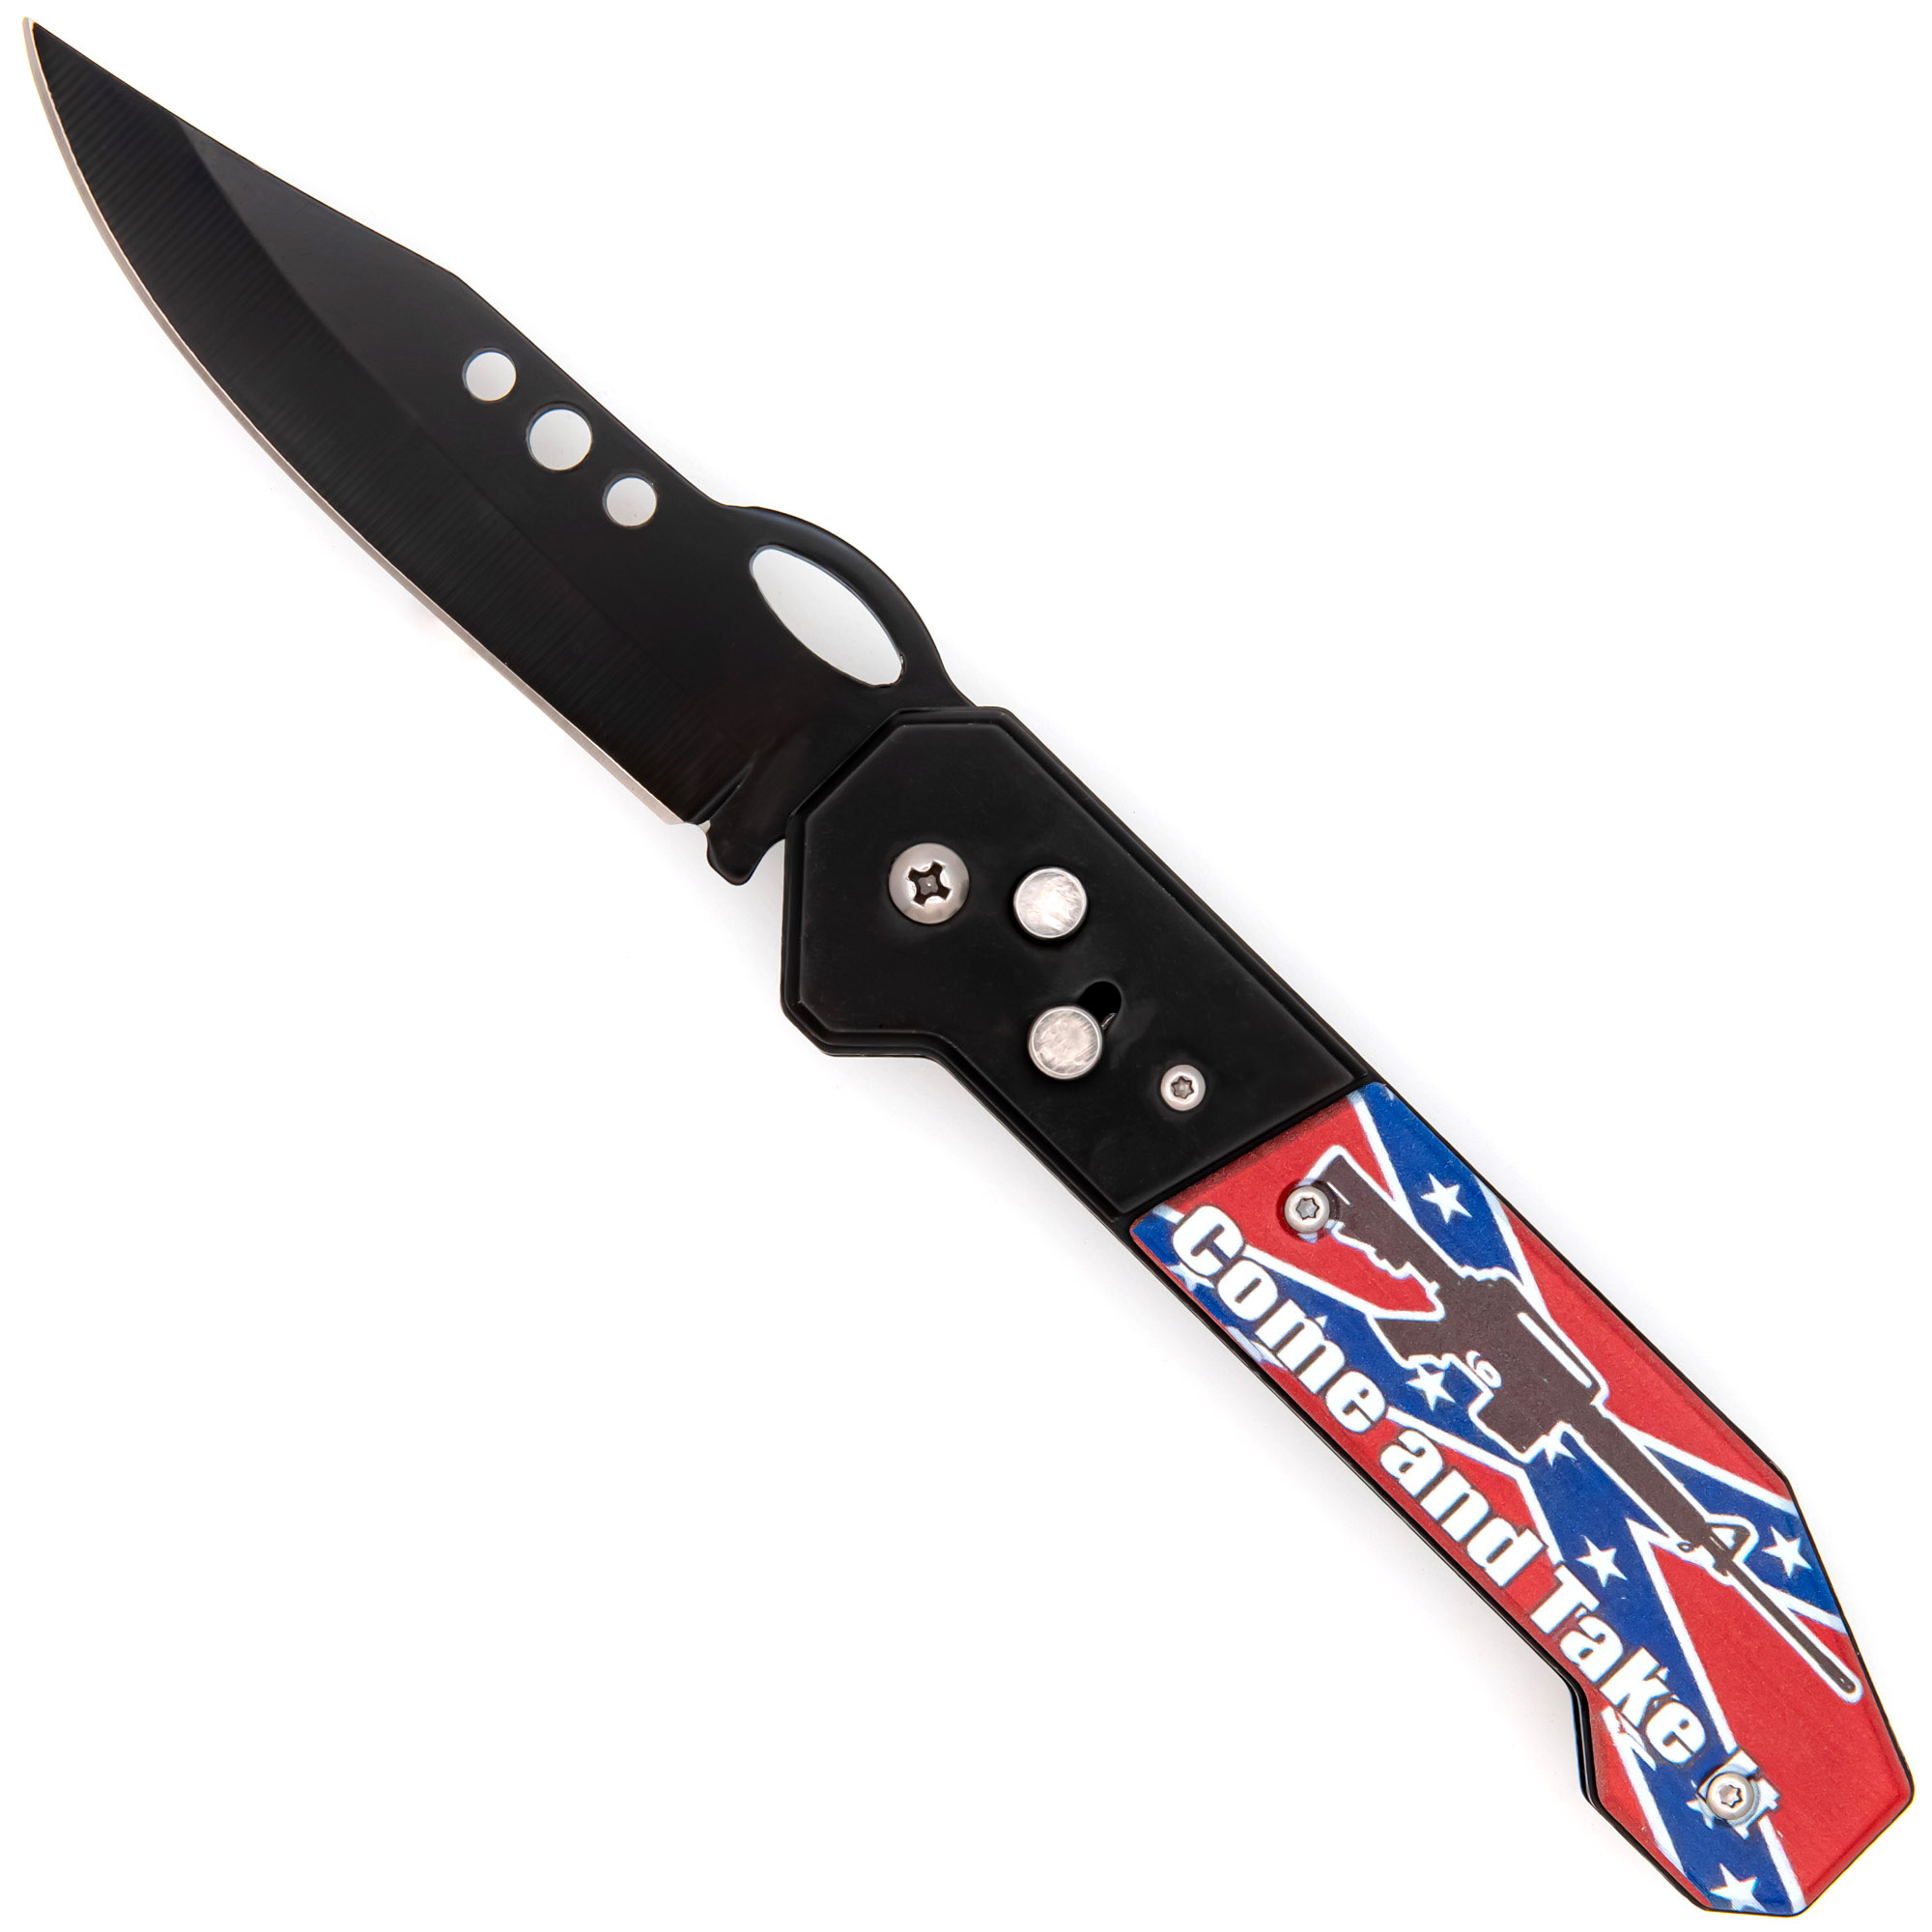 Code of Arms Automatic Push Button SWITCHBLADE Pocket Knife | Come & Take It